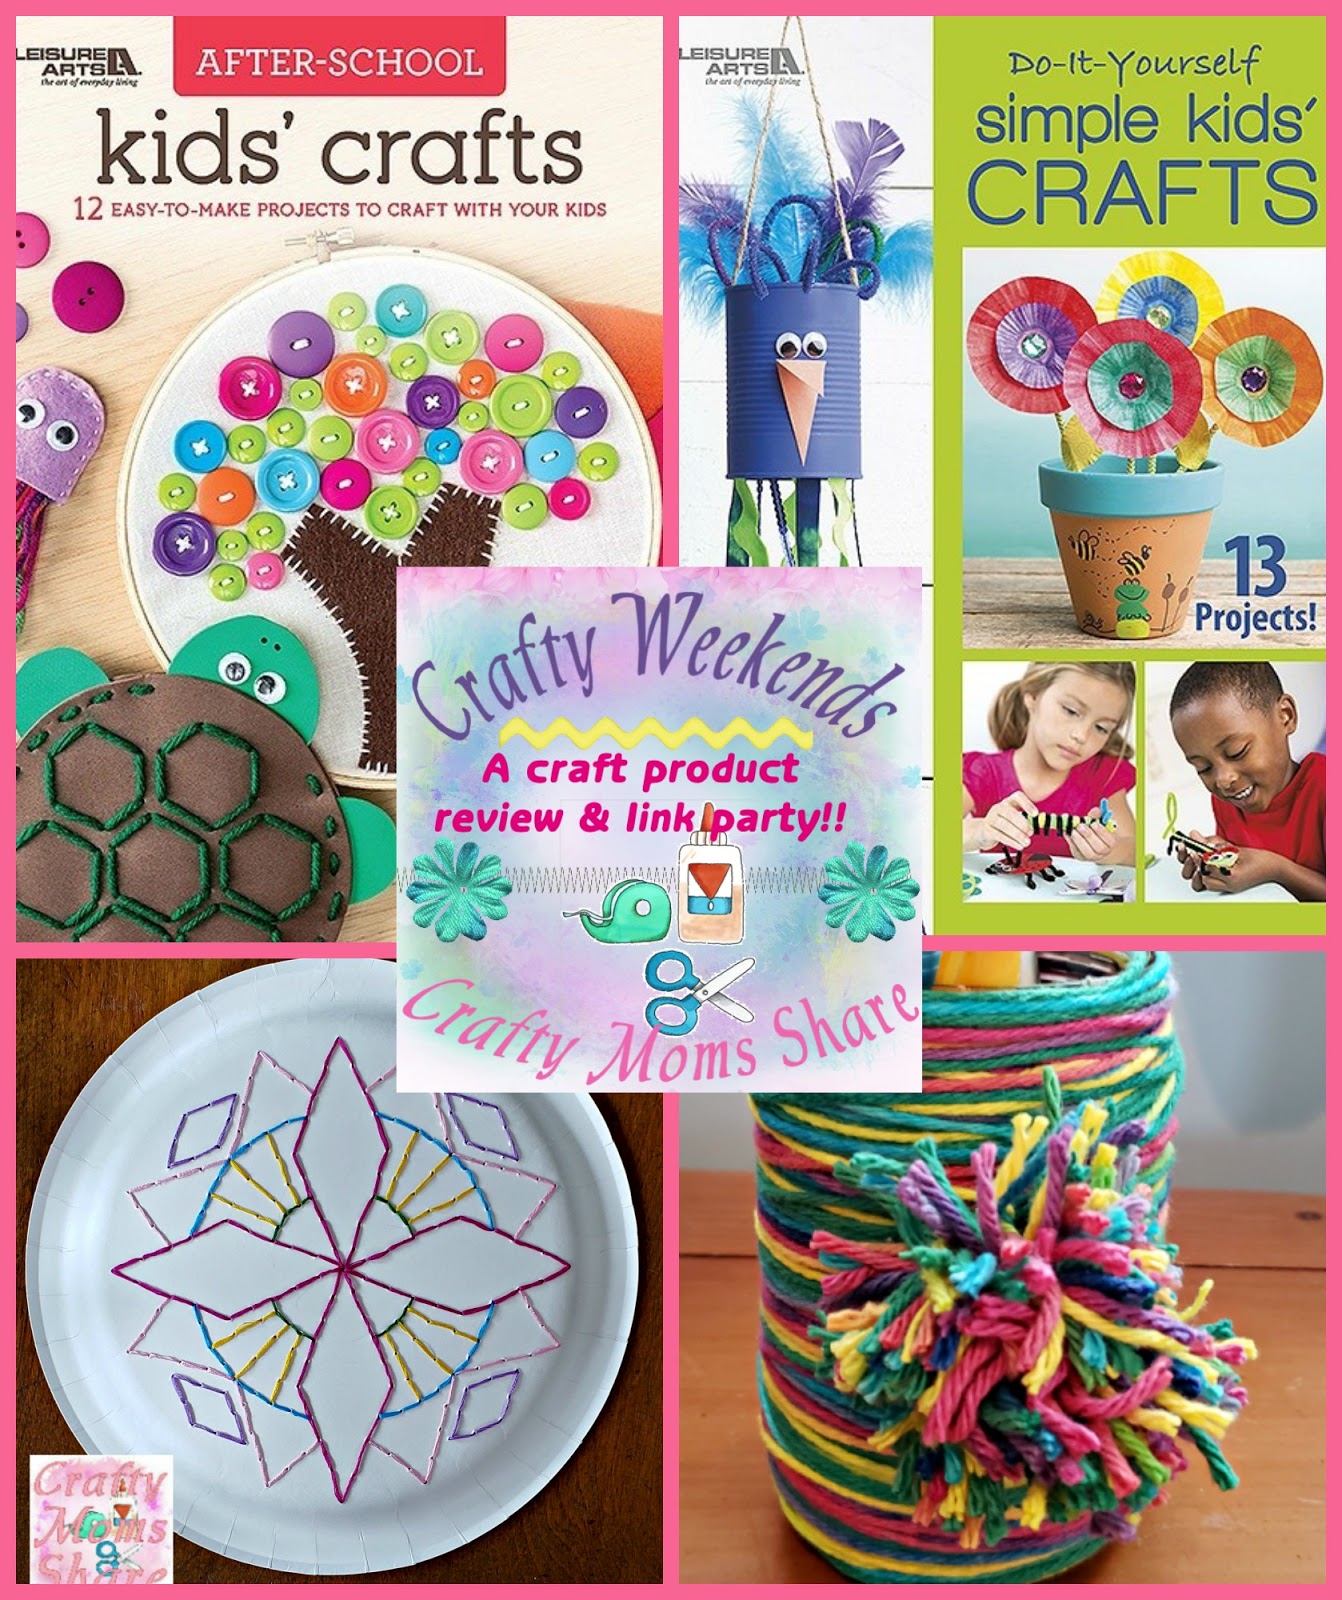 Crafty Moms Share: Kids' Craft Books -- a Crafty Weekends Review